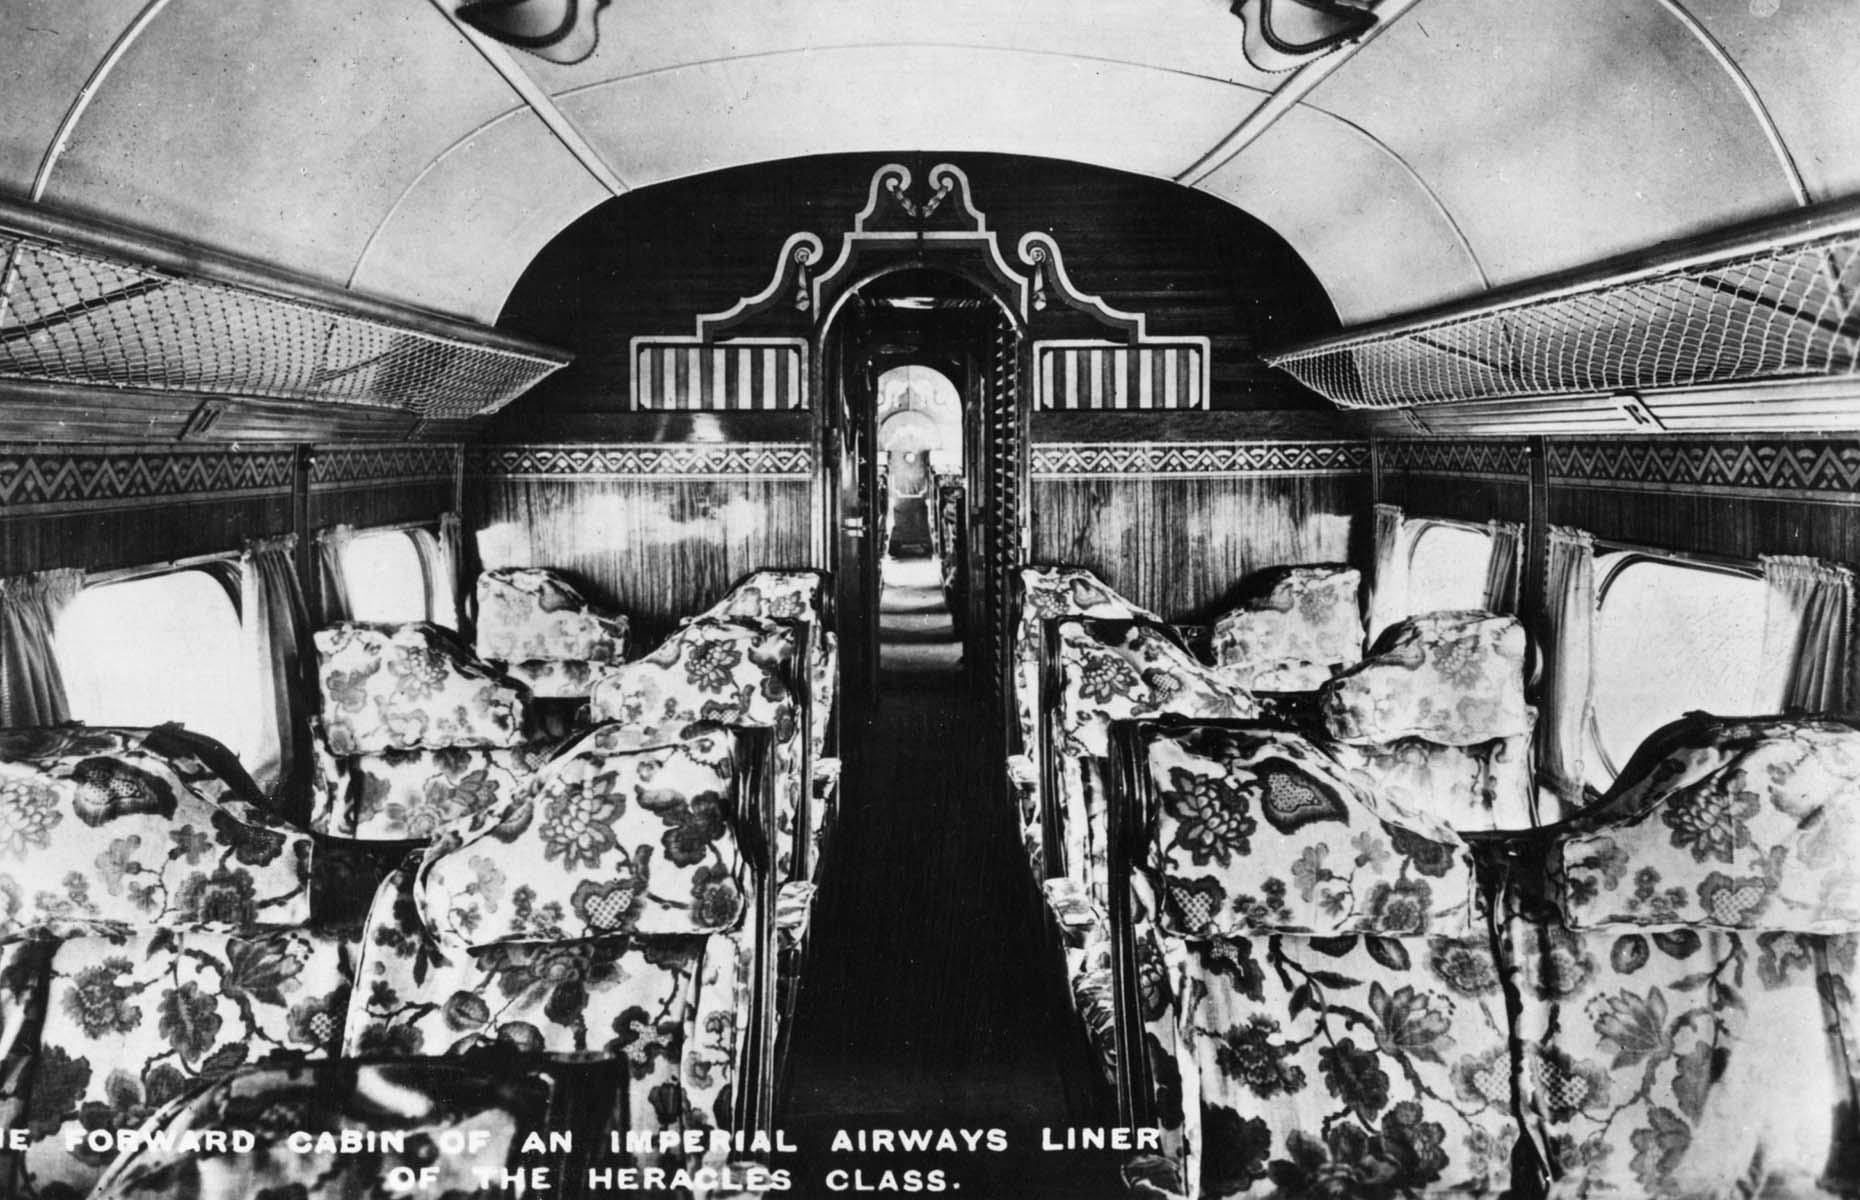 The aircraft was the domain of the elite, with high-ranking officials and wealthy businessmen taking to the skies to enjoy Imperial Airways' luxury service, which included seven-course meals, plush wall-to-wall carpeting and a stand-up bar. Unfortunately, all of the HPs have now been destroyed – some during the Second World War when the aircraft were drafted into the RAF – so only archive photographs survive.